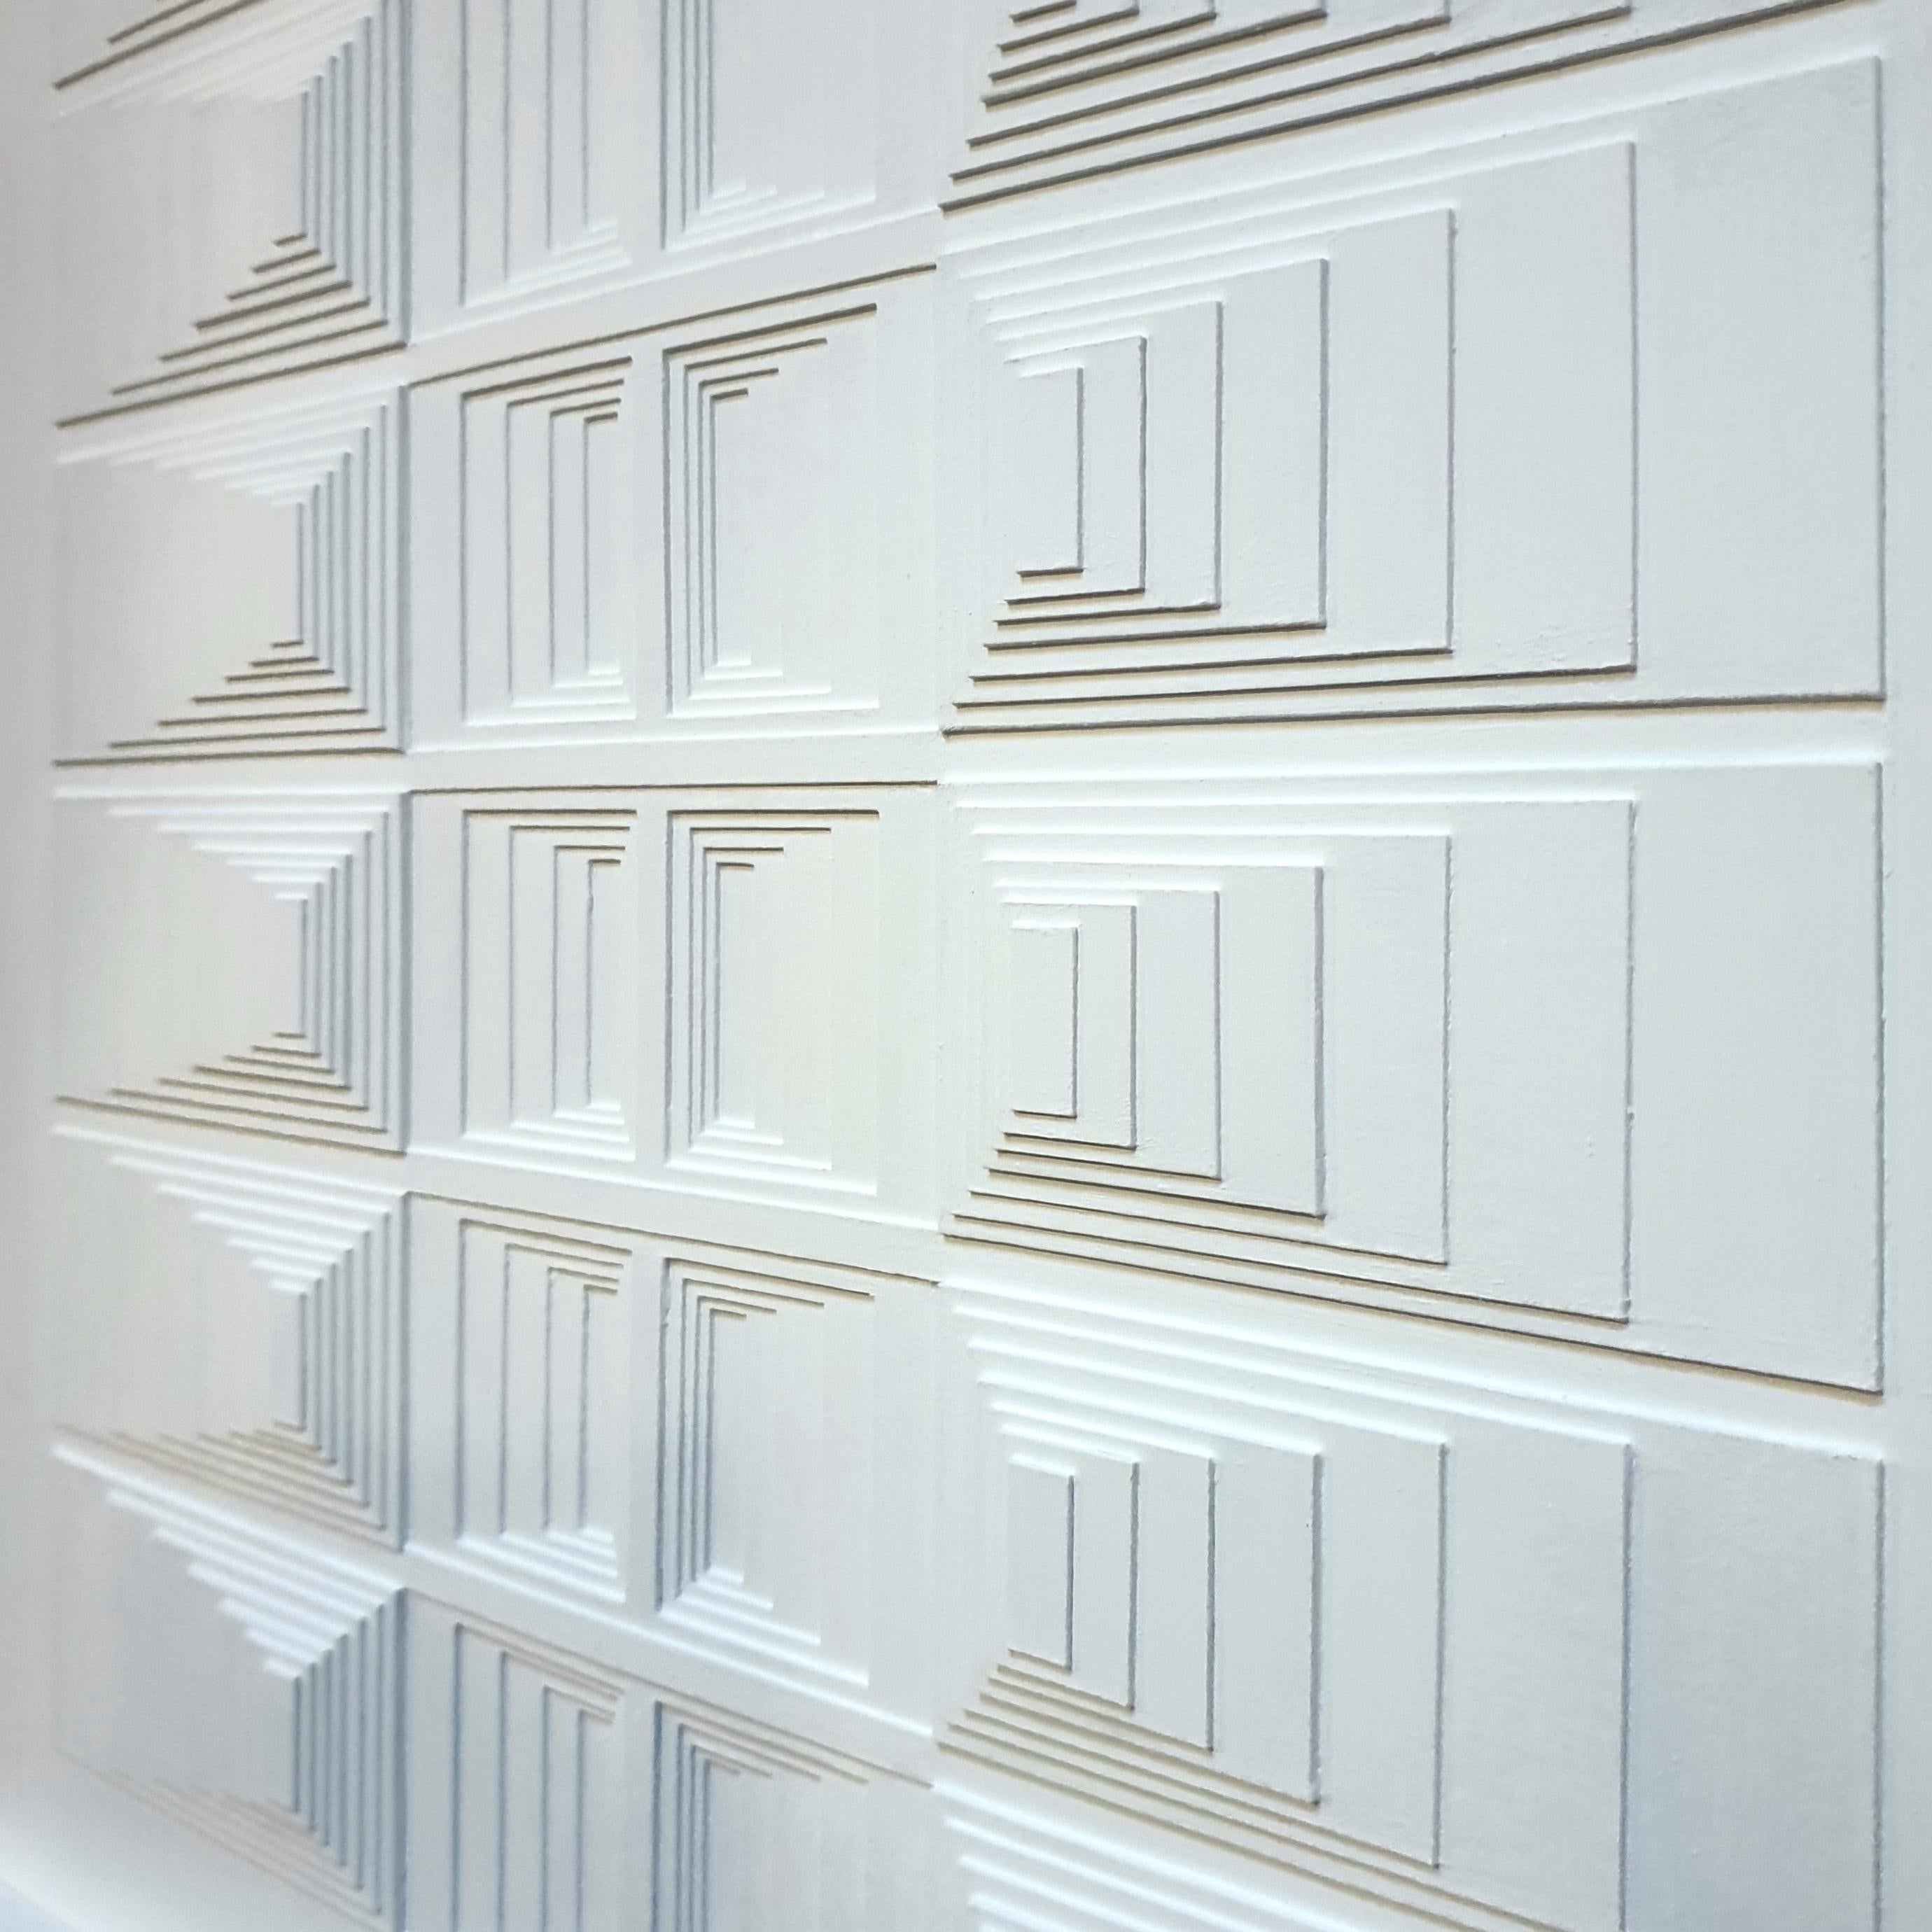 BB1121W is a unique one-of-a-kind contemporary modern painting relief by Dutch artist Eef de Graaf. The relief is made from meticulously hand cut cardboard elements finished with a matt white acrylic paint. This art work is mounted in a simple white